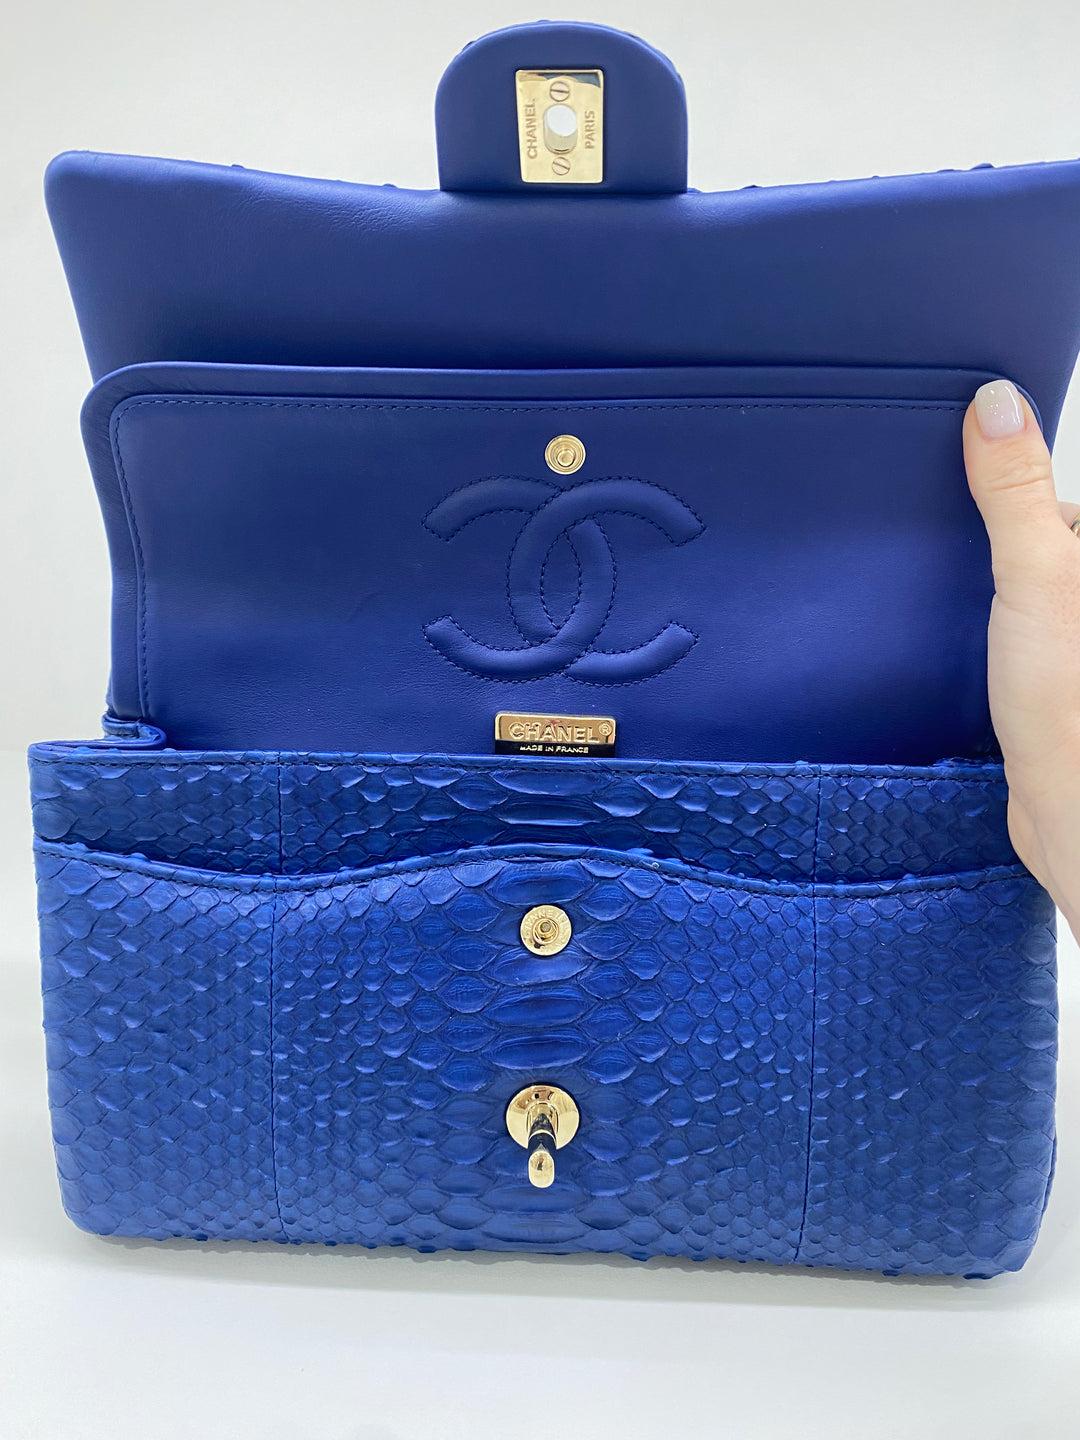 Condition: Very good used condition

Colour: Blue

Leather: Snakeskin leather

Series: 22 (2016-2017)

Hardware Colour: Silver

Inclusion: Bag only 

Origin: France